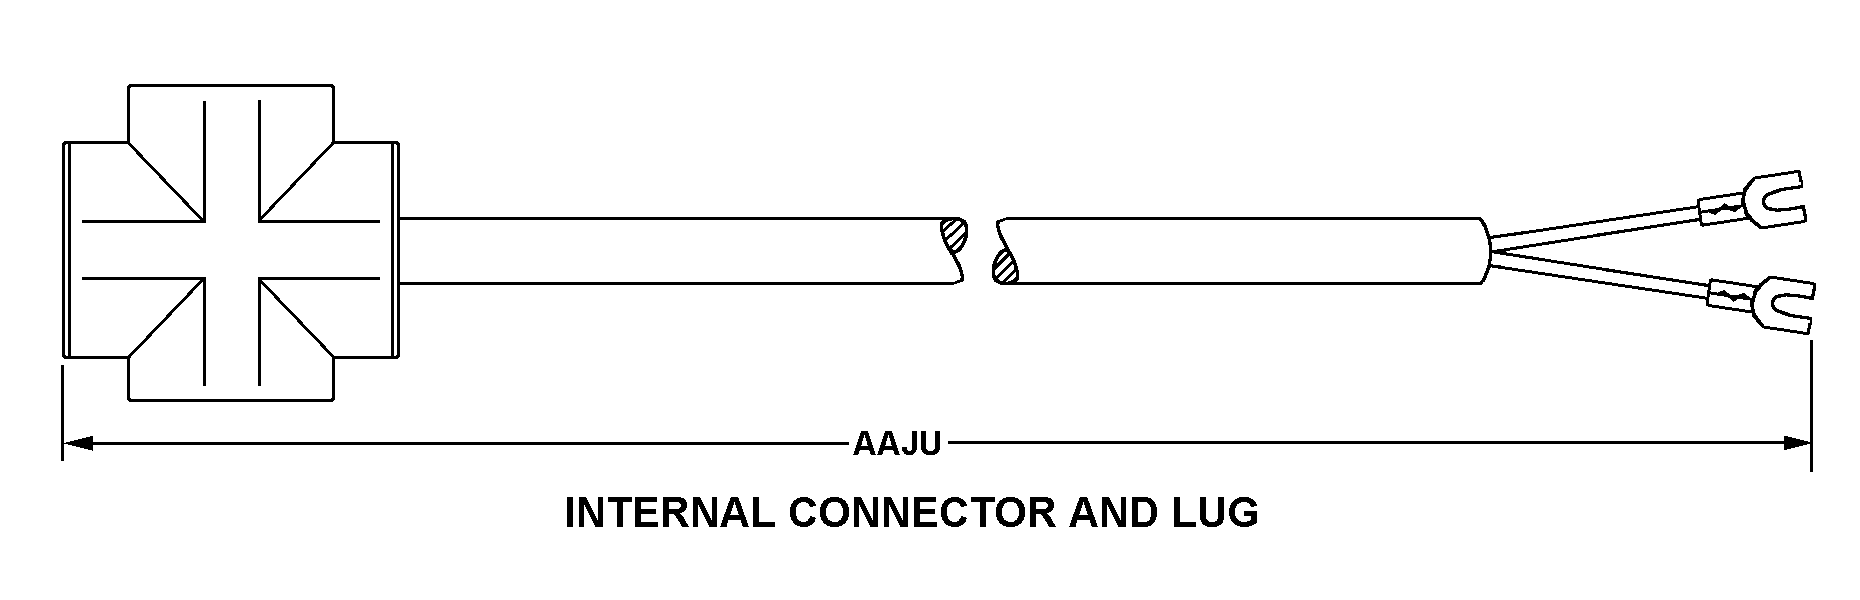 INTERNAL CONNECTOR AND LUG style nsn 6150-00-995-3847